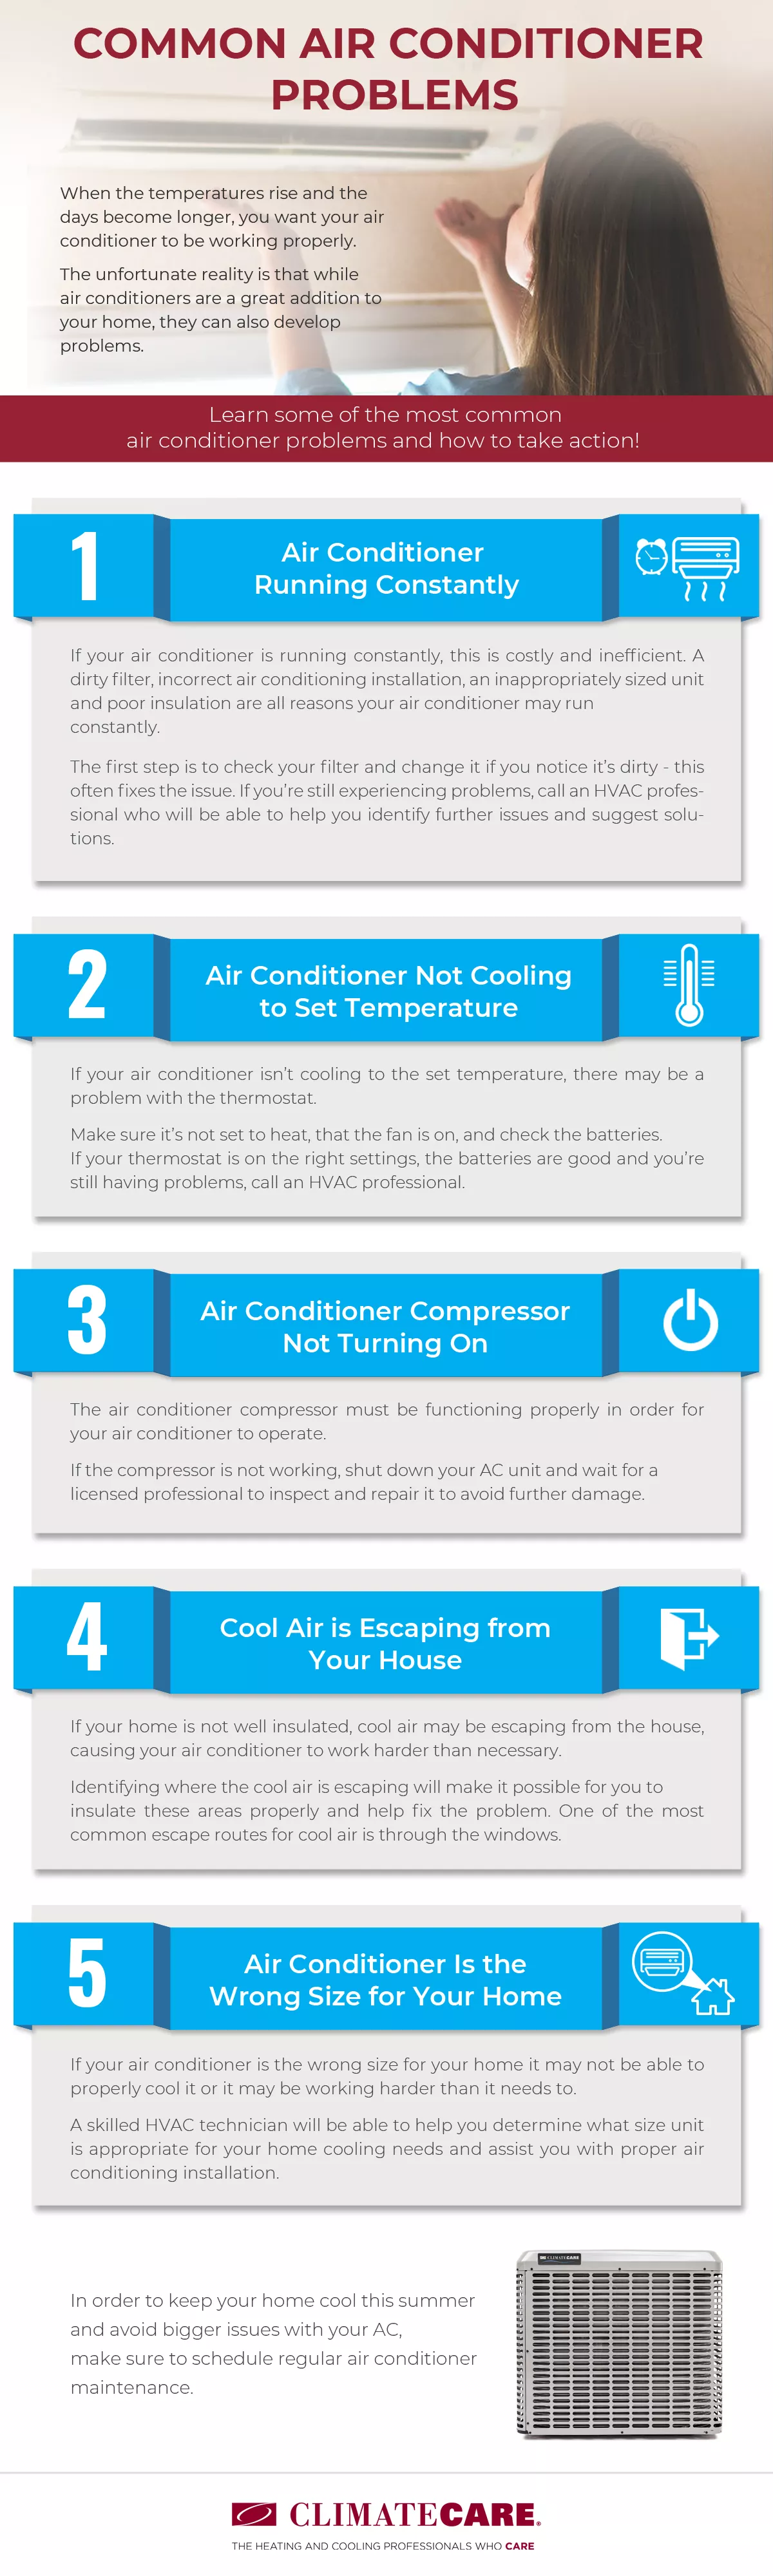 5 Common Air Conditioner Problems with explanations and solutions